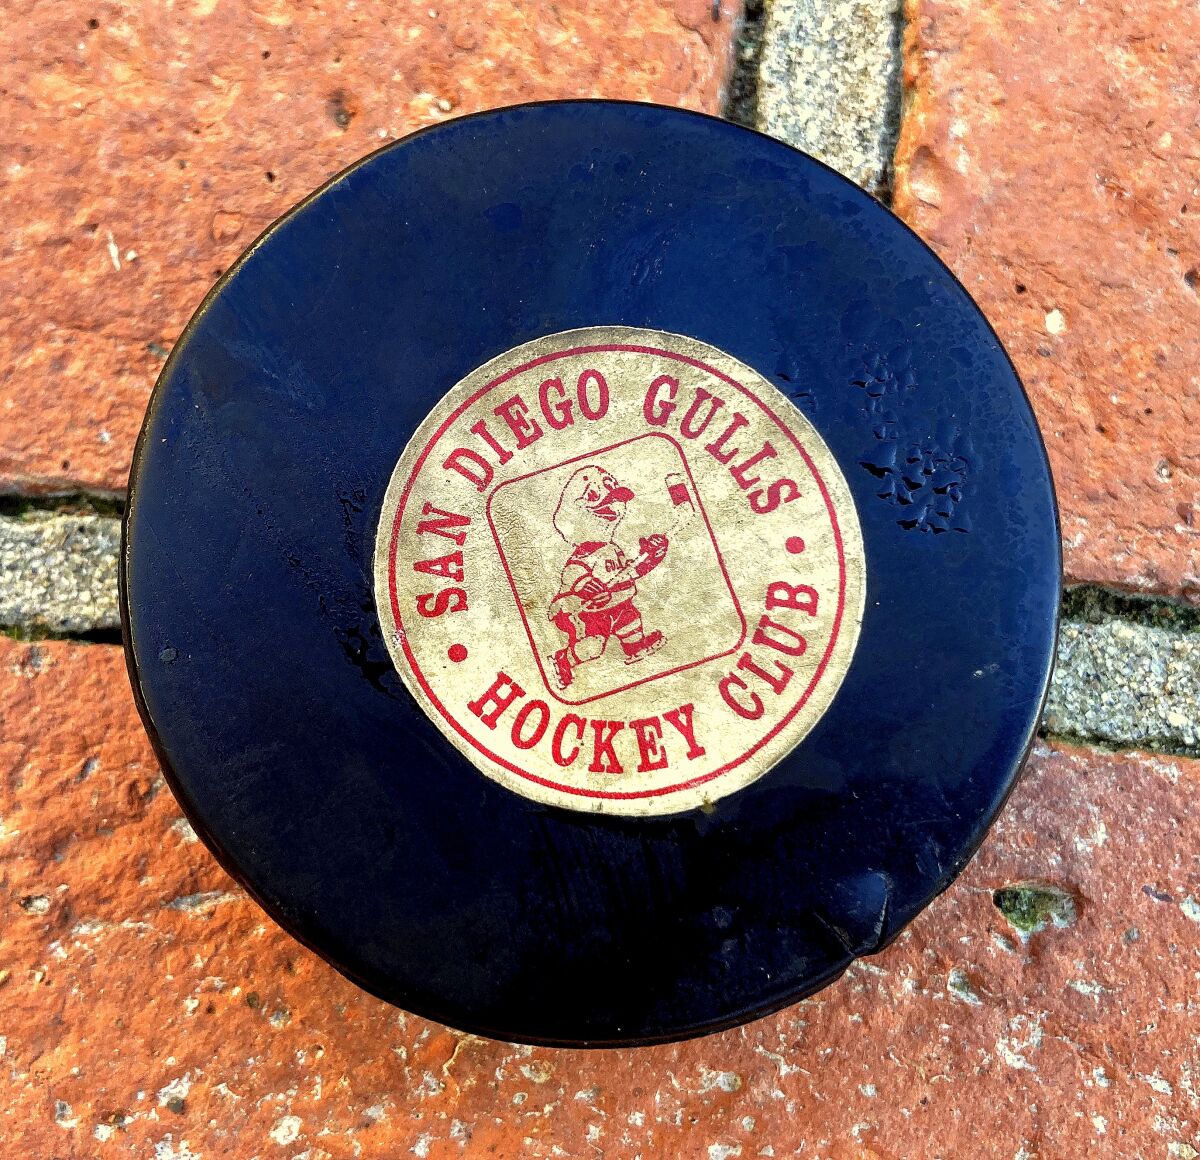 This San Diego Gulls puck ended up in the lap — and freezer — of young Gulls fan Eric DuVall.